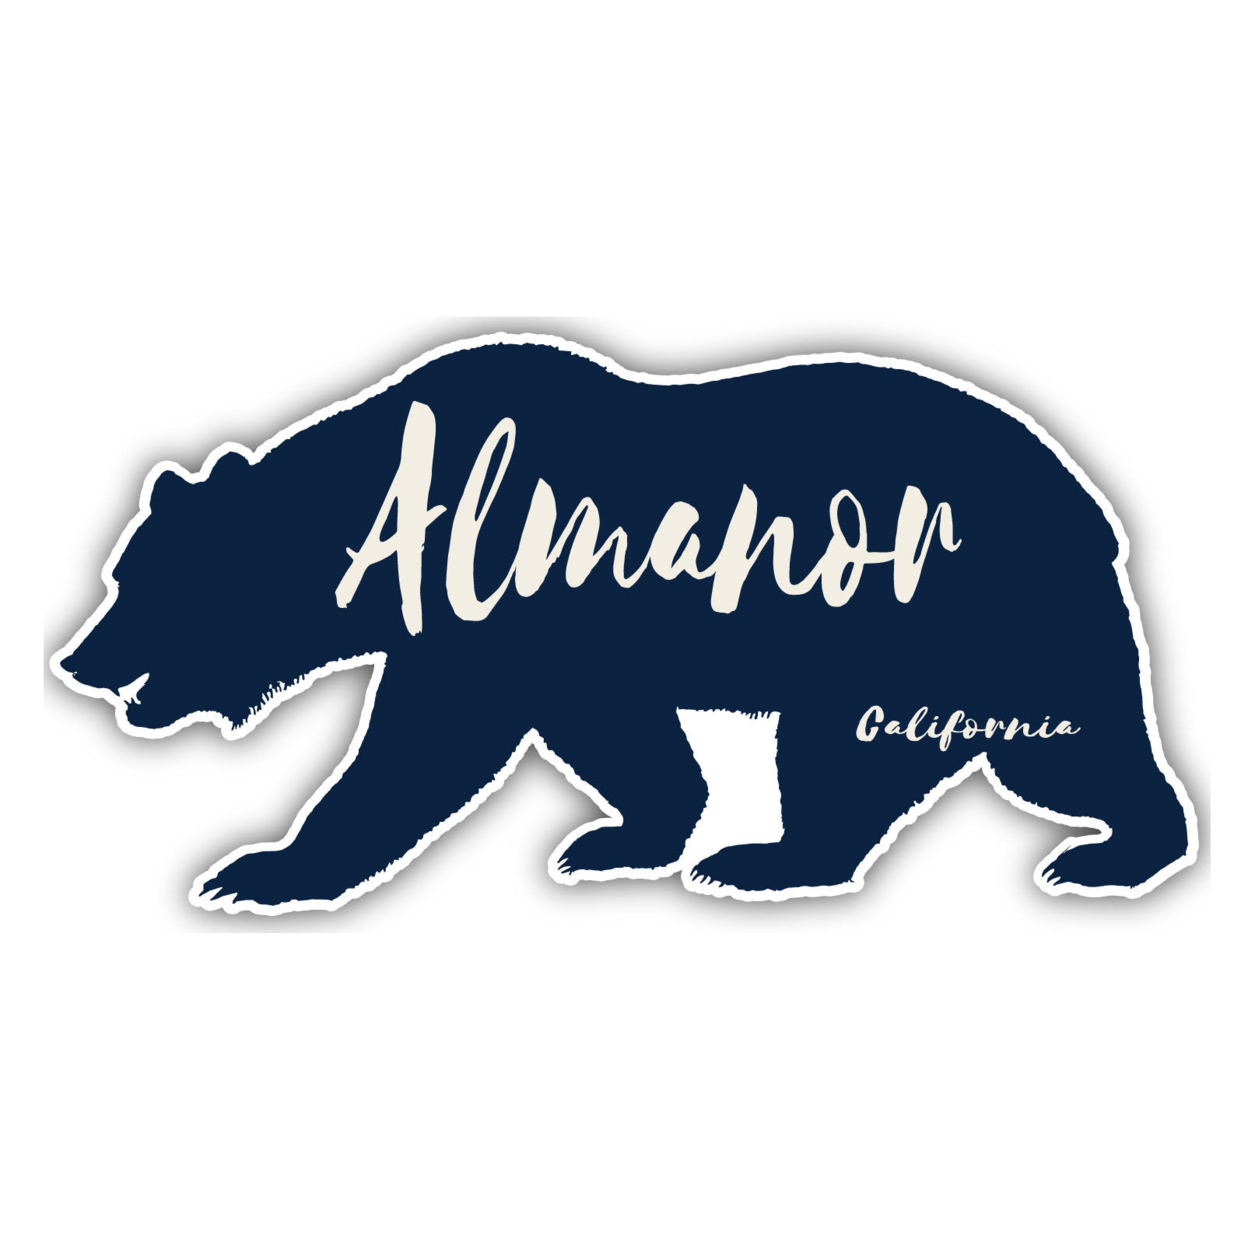 Almanor California Souvenir Decorative Stickers (Choose Theme And Size) - 4-Pack, 12-Inch, Camp Life